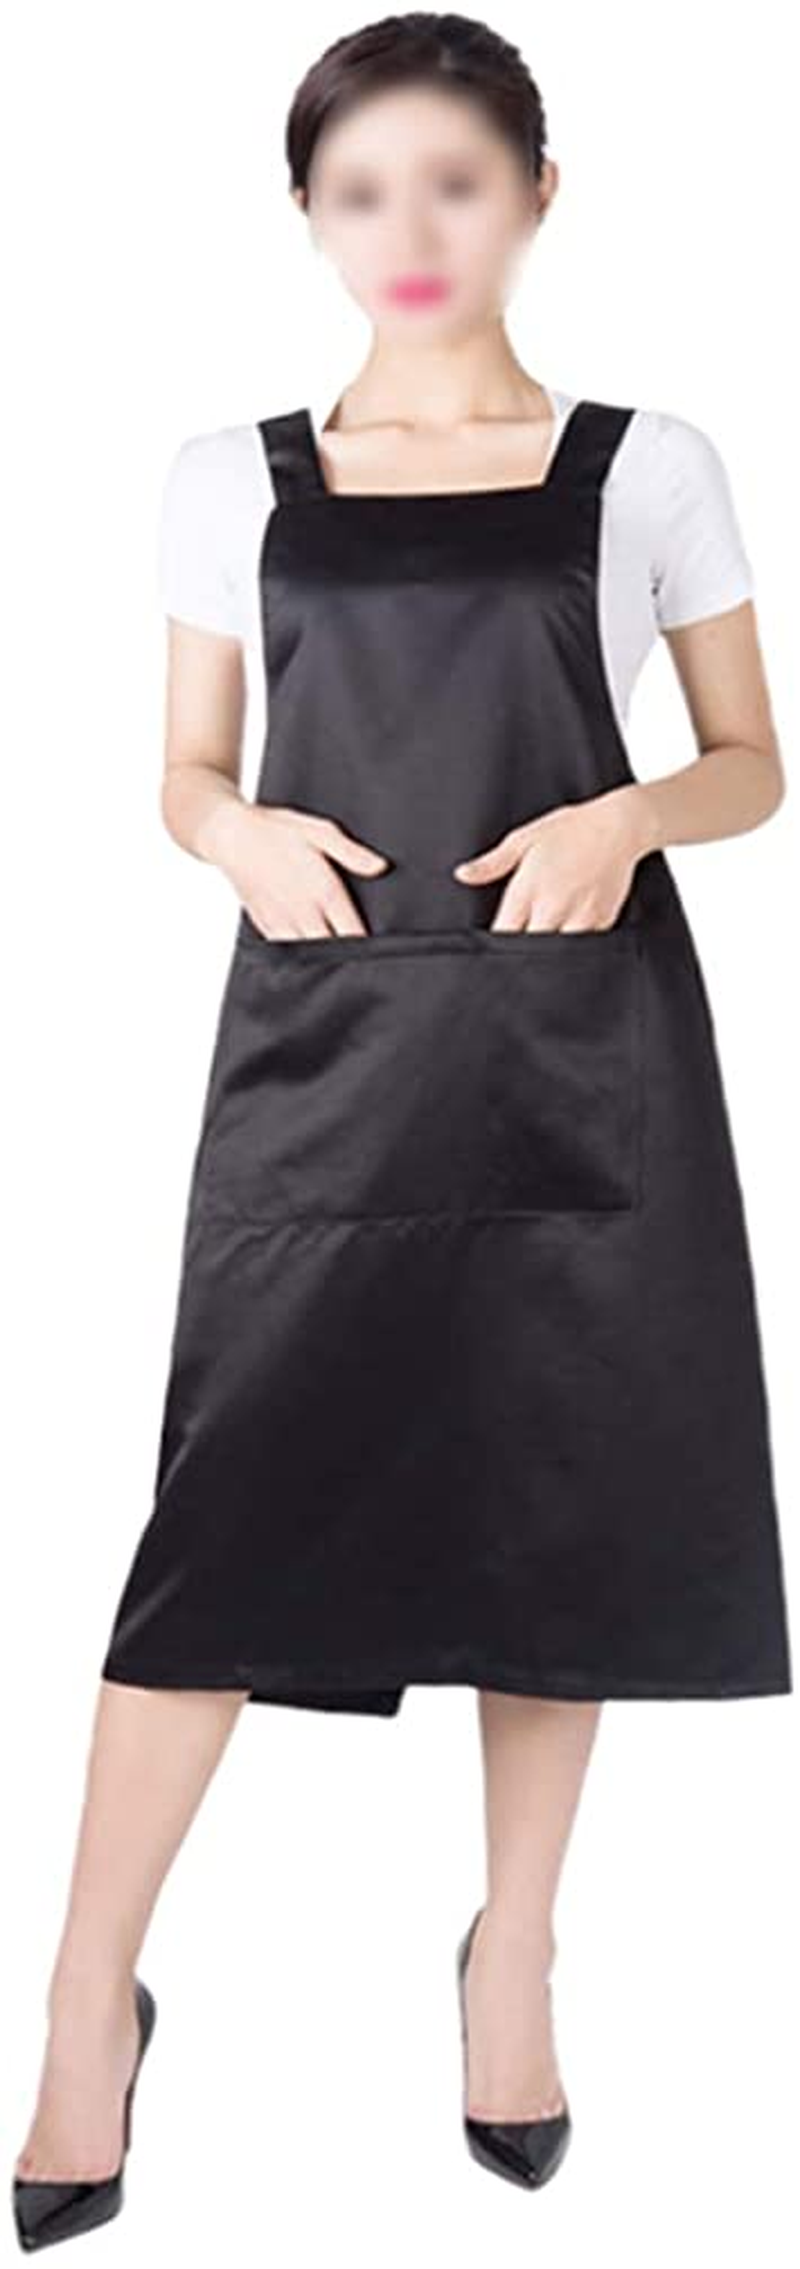 Minkissy Salon Apron Waterproof Hair Stylist Apron Hairdressing Barber Smock Cape Waitress Clothes Vest with Pocket for DIY Salon Barber Pet Groomers